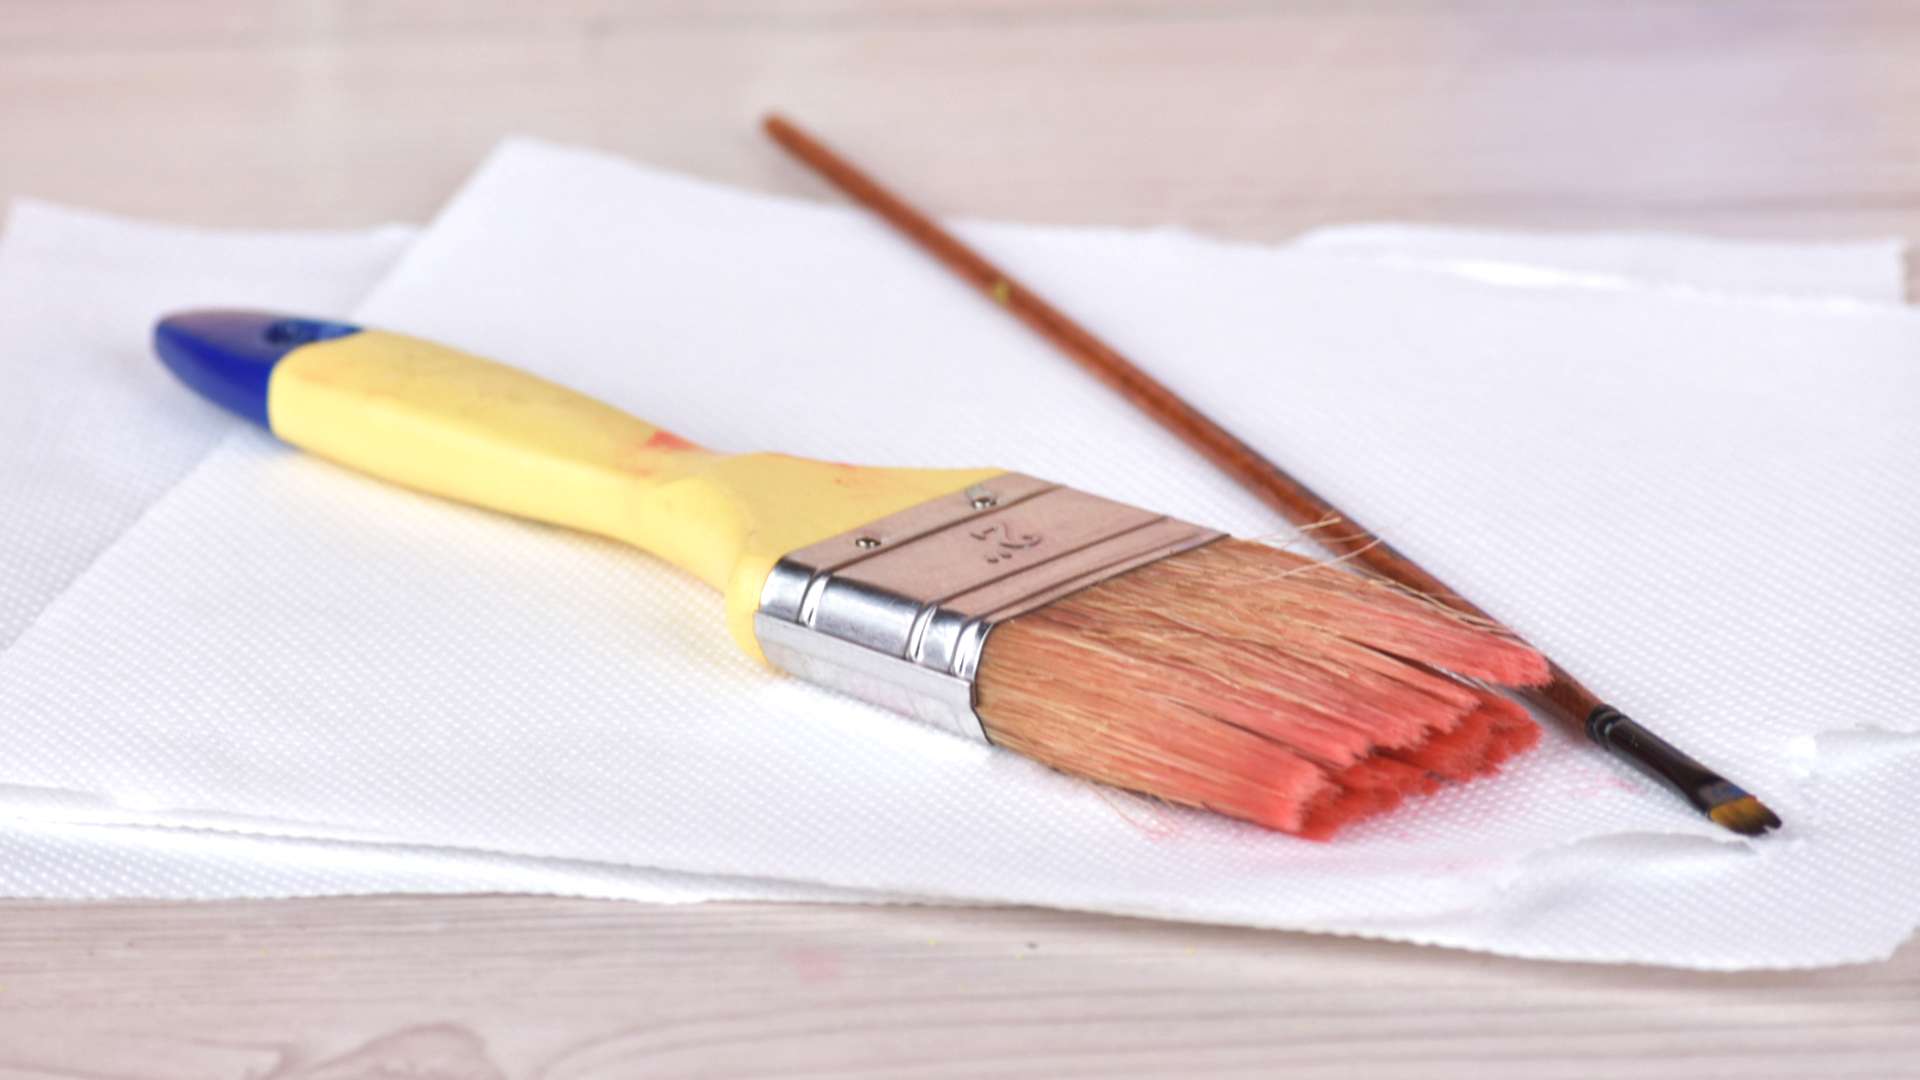 How To Take Care Of Paint Brushes